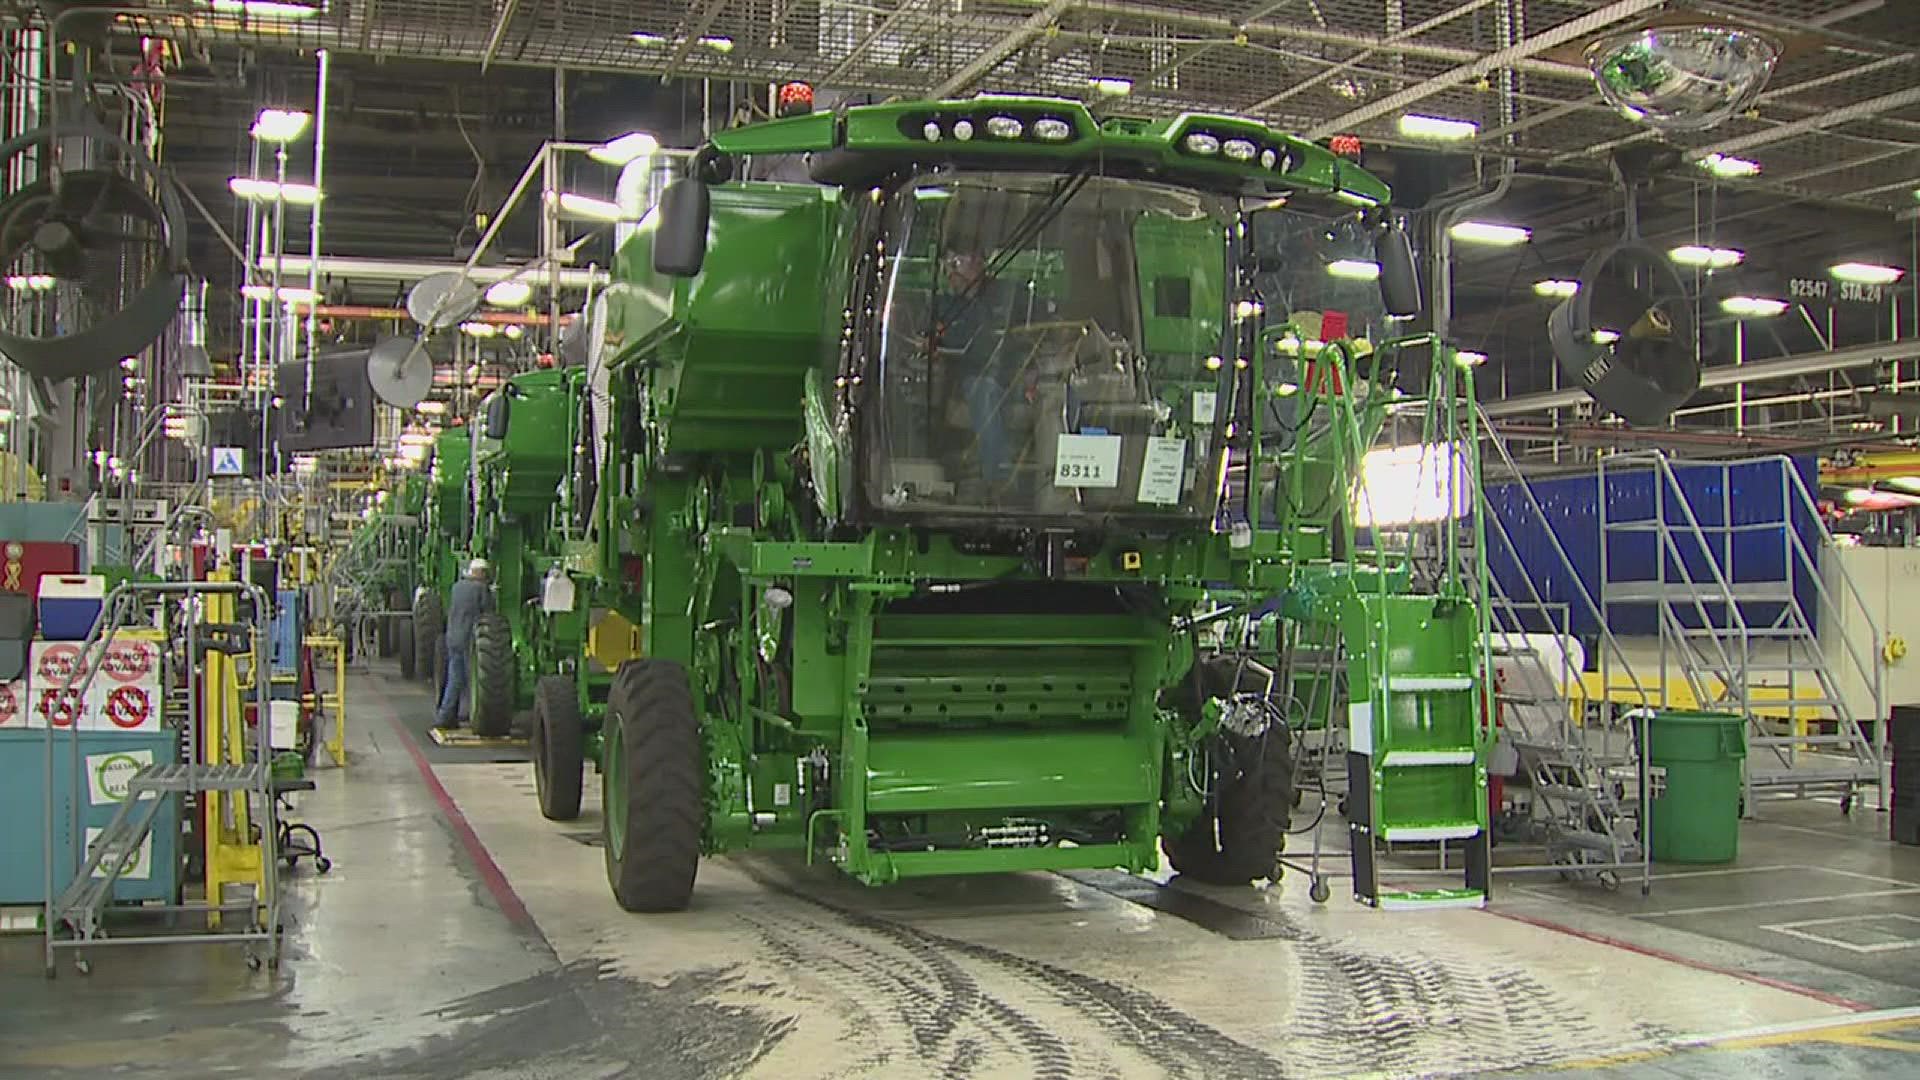 John Deere officials say operations will continue as normal after union employees voted against a new contract agreement.